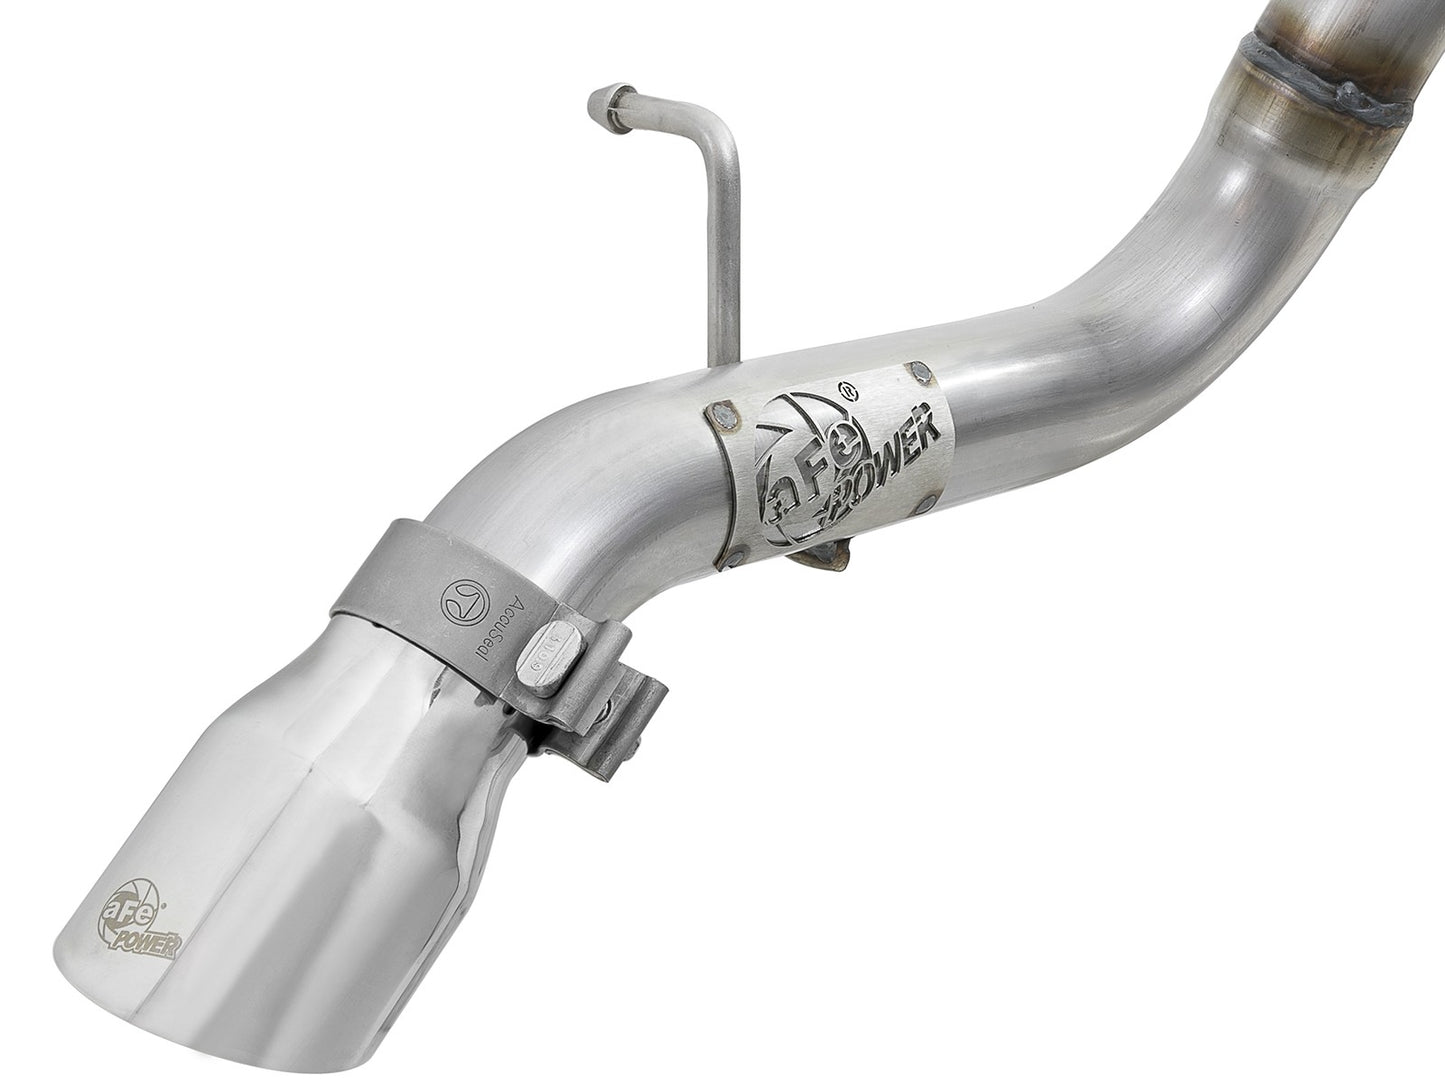 AFE POWER Mach Force-Xp 2-1/2" 409 Stainless Steel Catback Hi-Tuck Exhaust (Polished Tip) System Jeep Wrangler (JL) 2018-2020